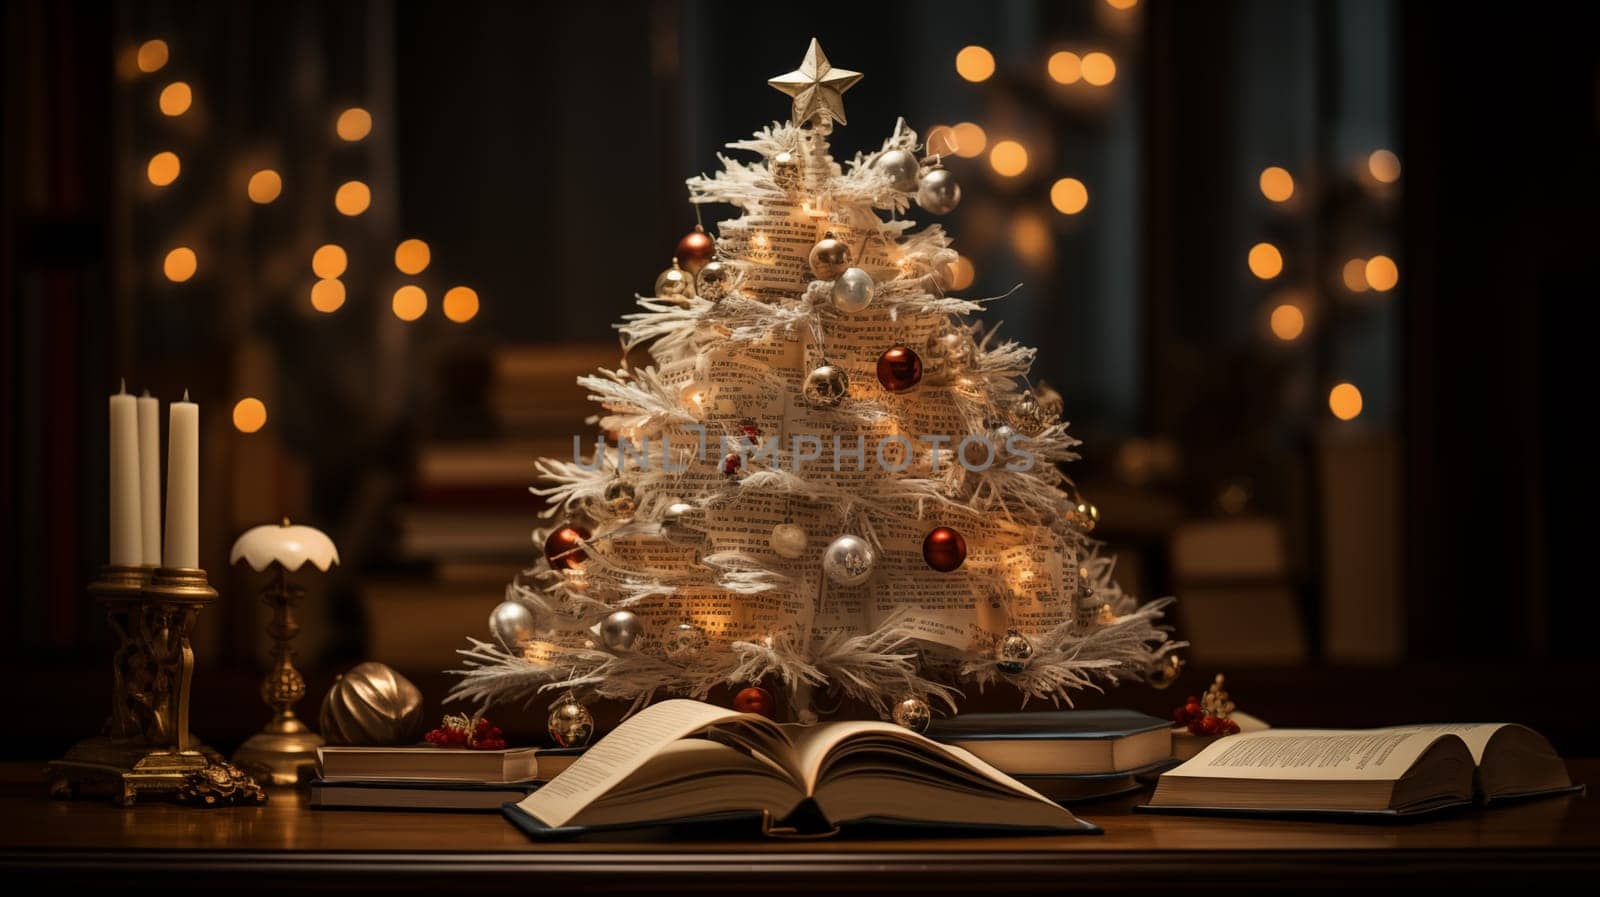 A creative cute little Christmas tree made of book leaves stands on a vintage wooden table in the living room, next to open books and candles in candlesticks